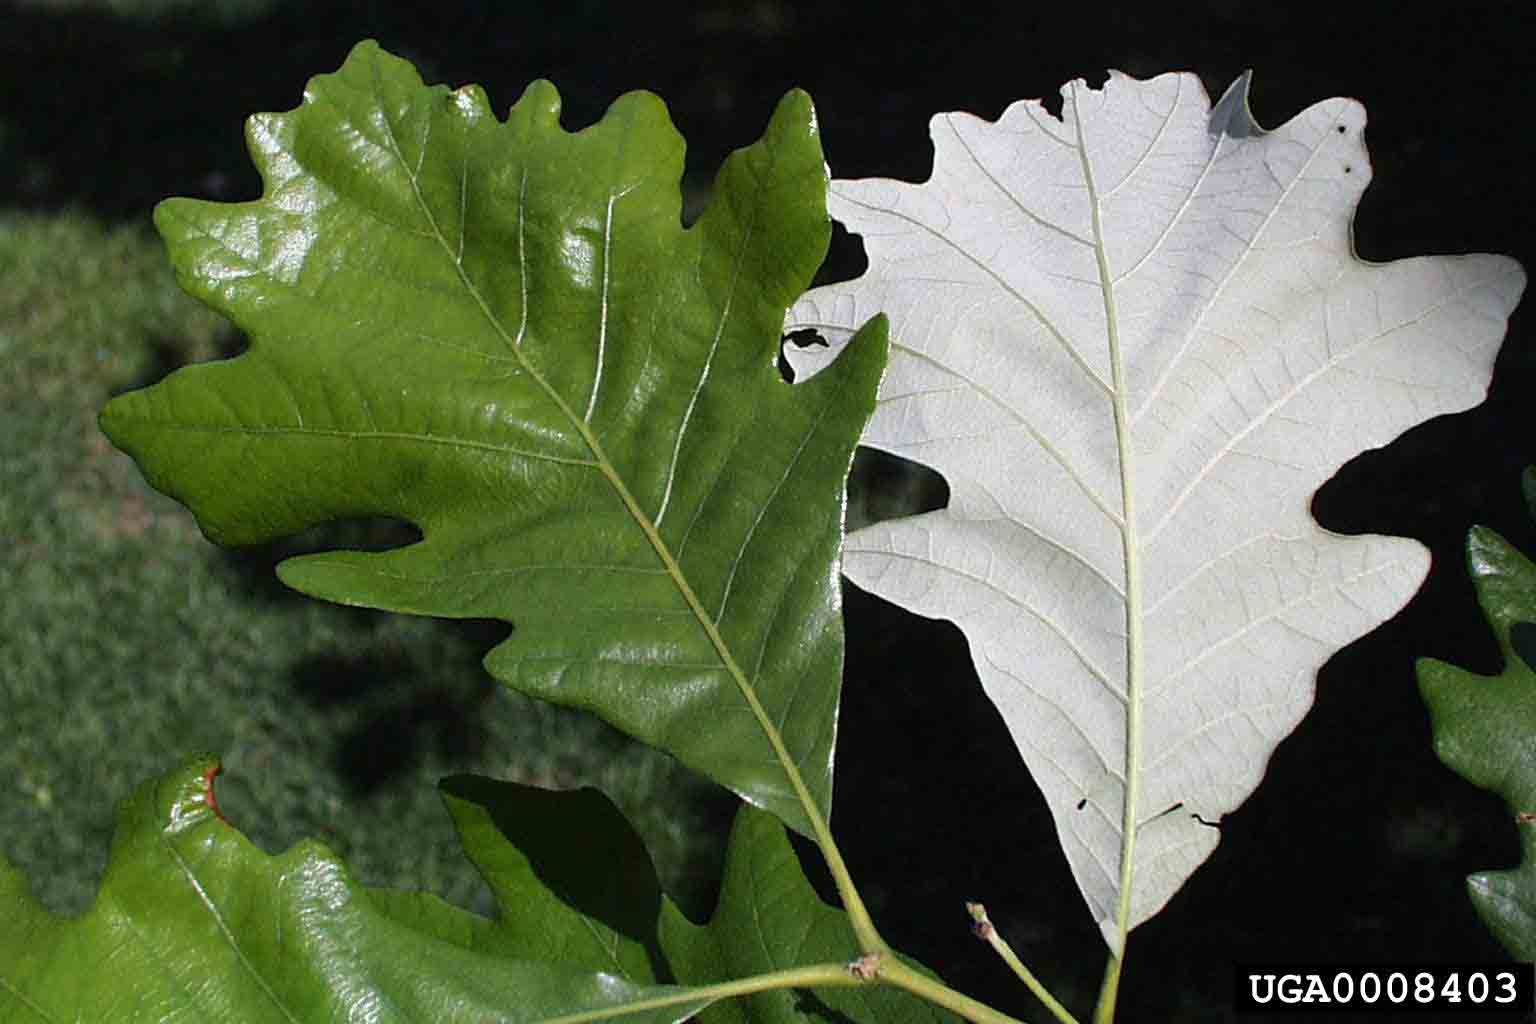 Swamp white oak leaves, 3"-7" long with no bristles on tips